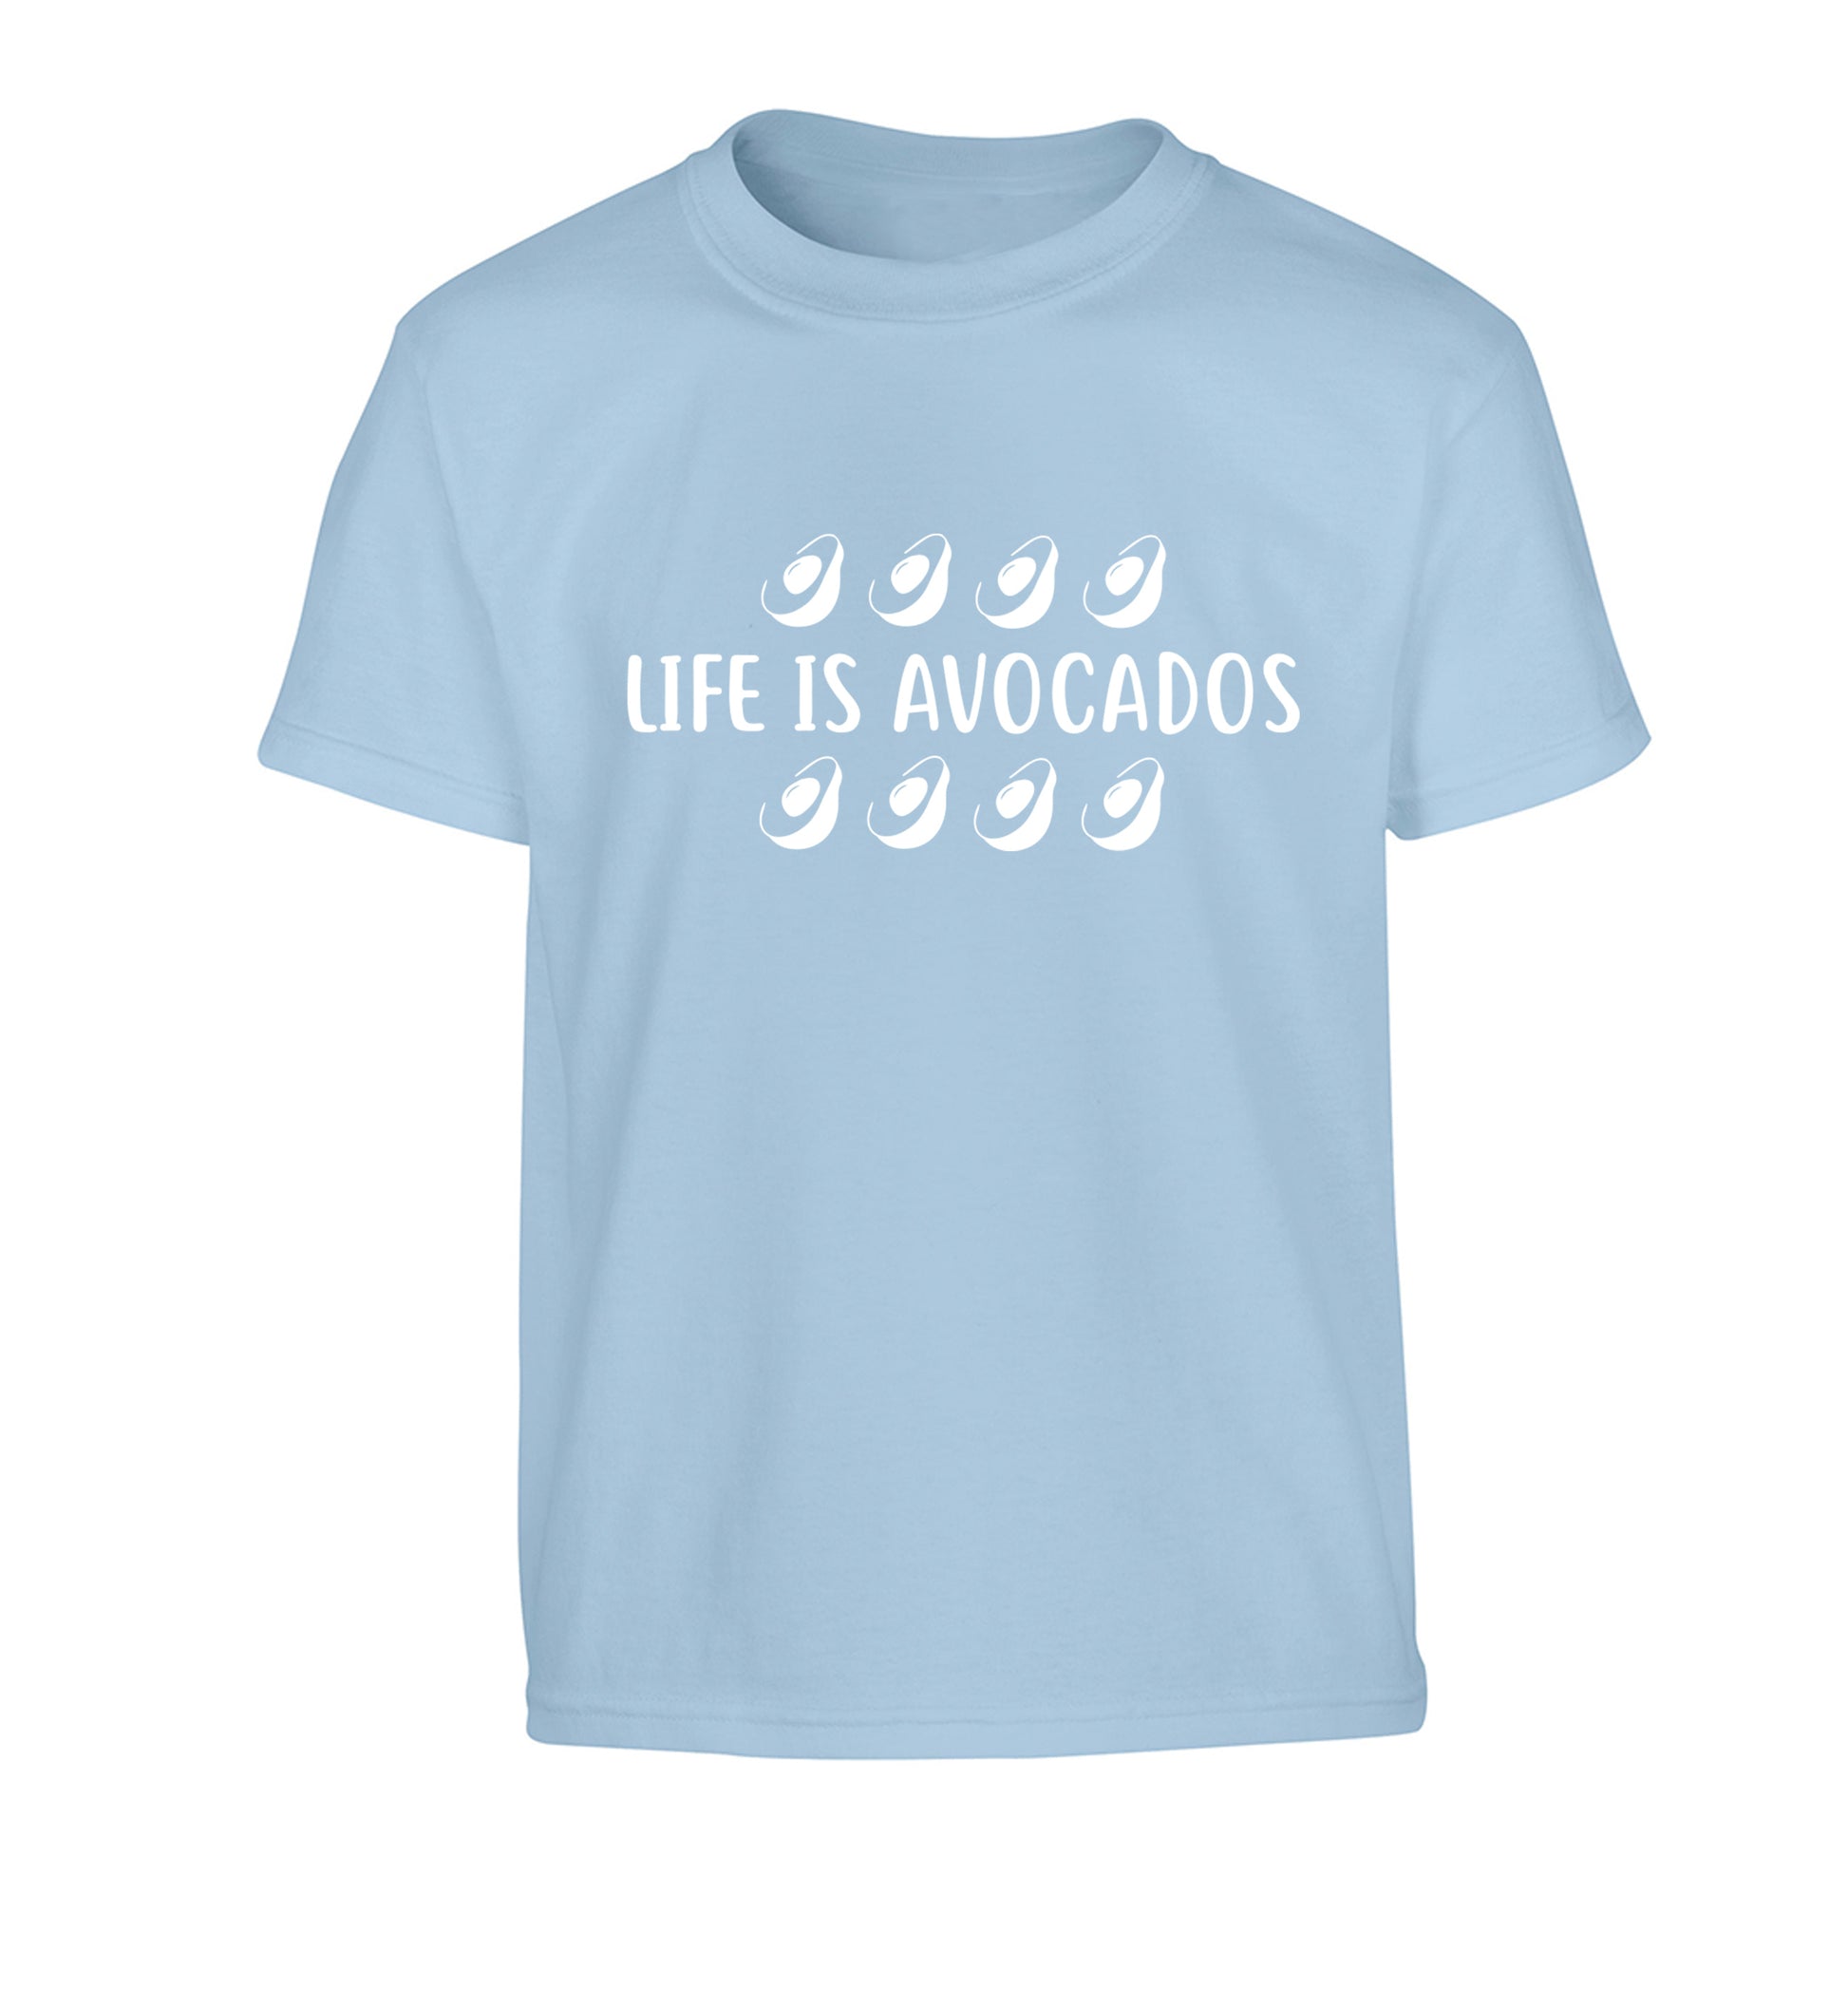 Life is avocados Children's light blue Tshirt 12-14 Years